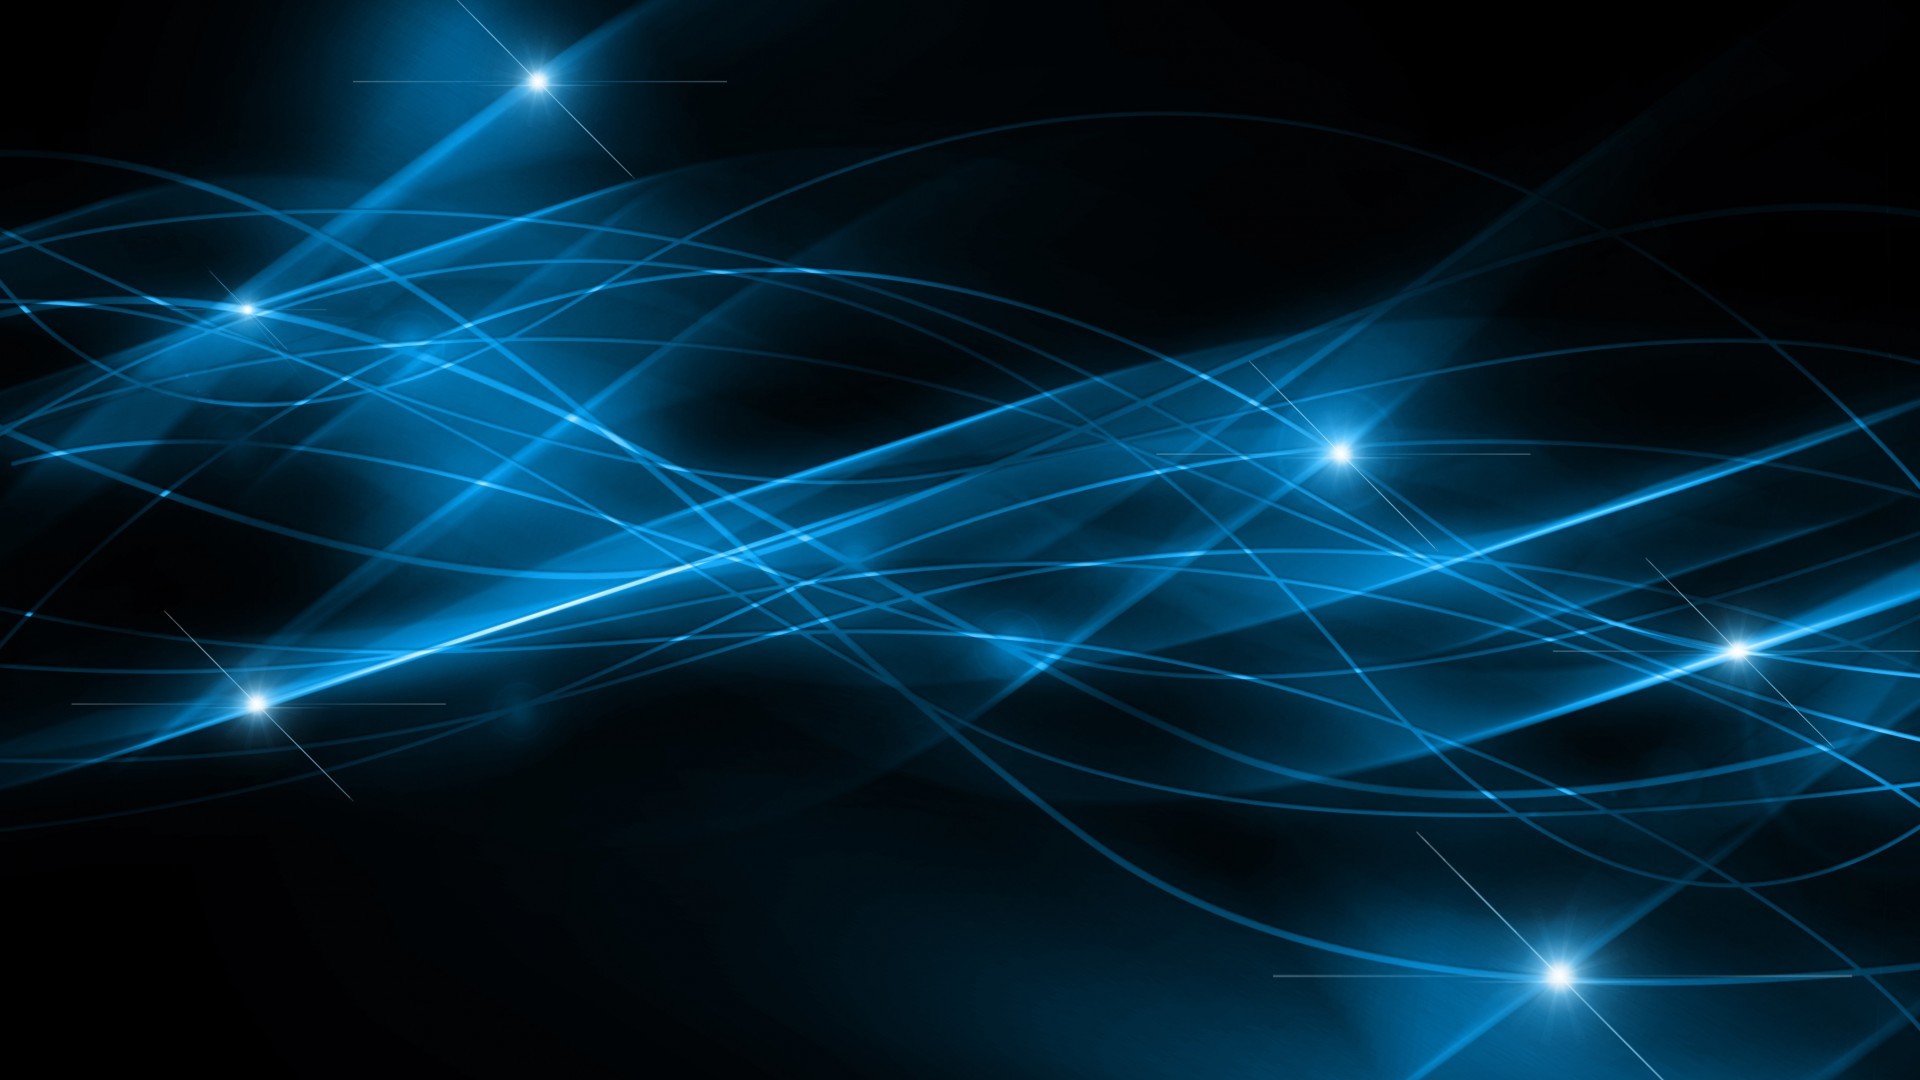 Black and blue abstract wallpaper background